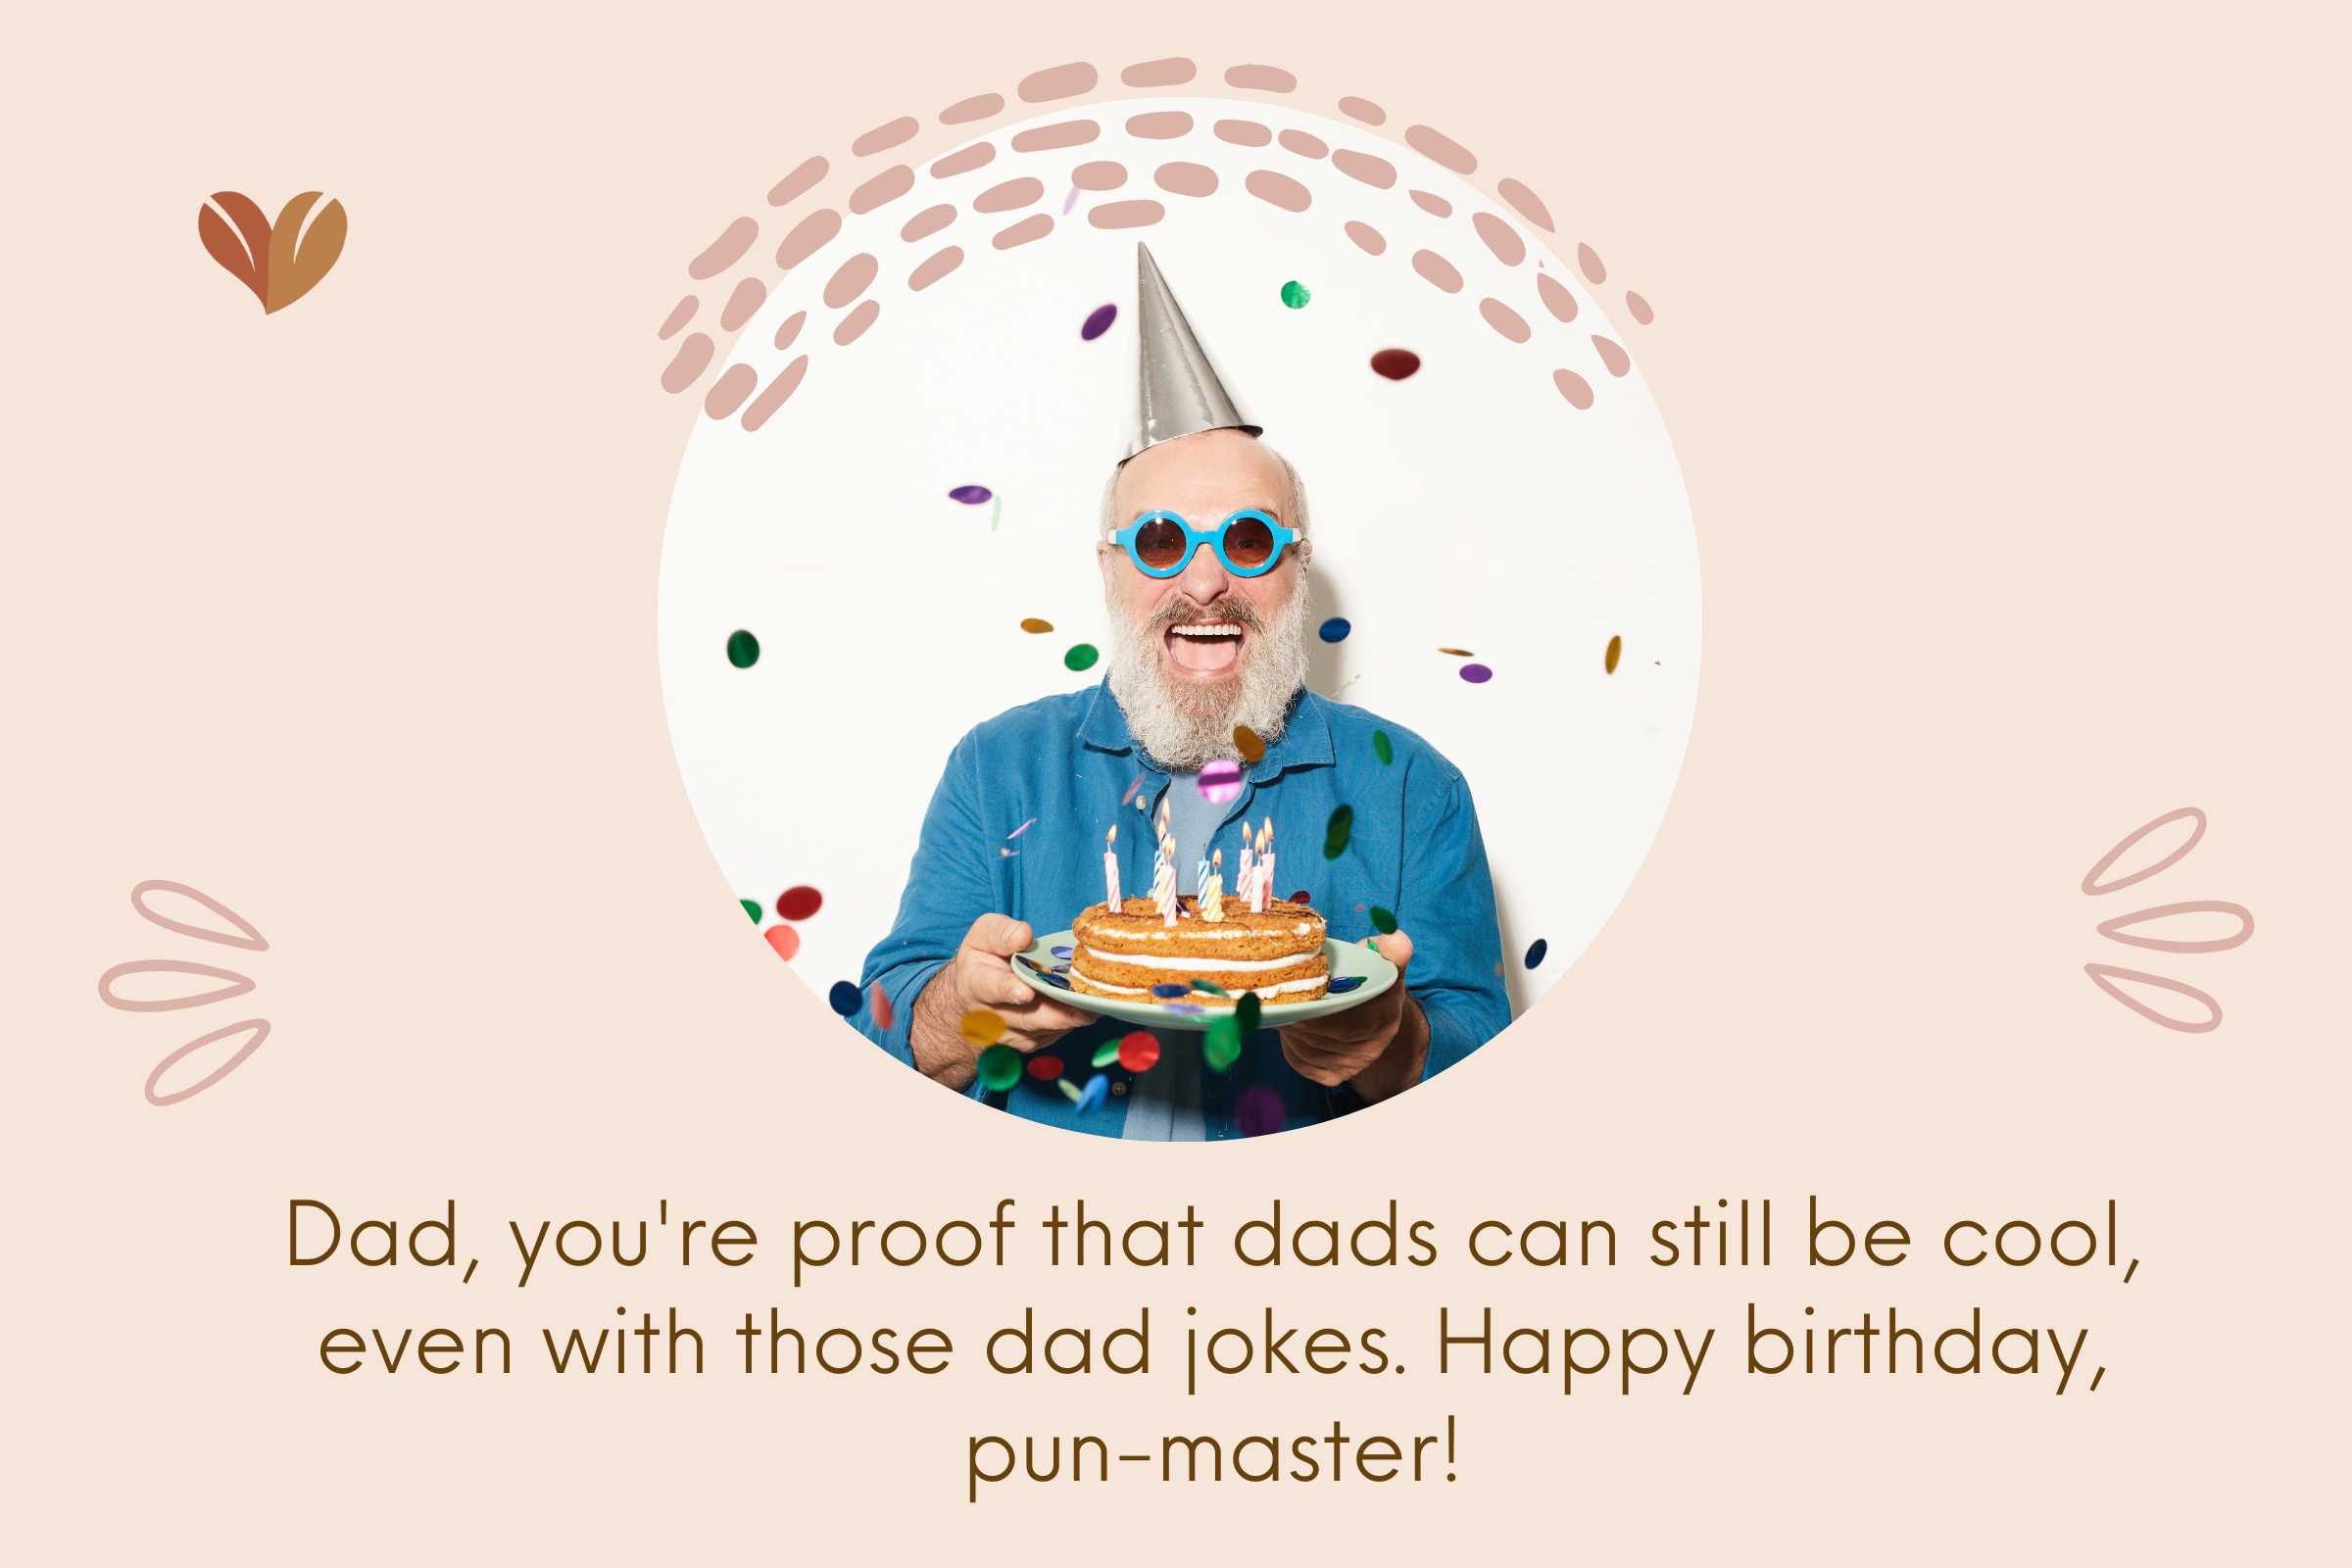 May your birthday be filled with laughter and groans - Best birthday wishes for dad